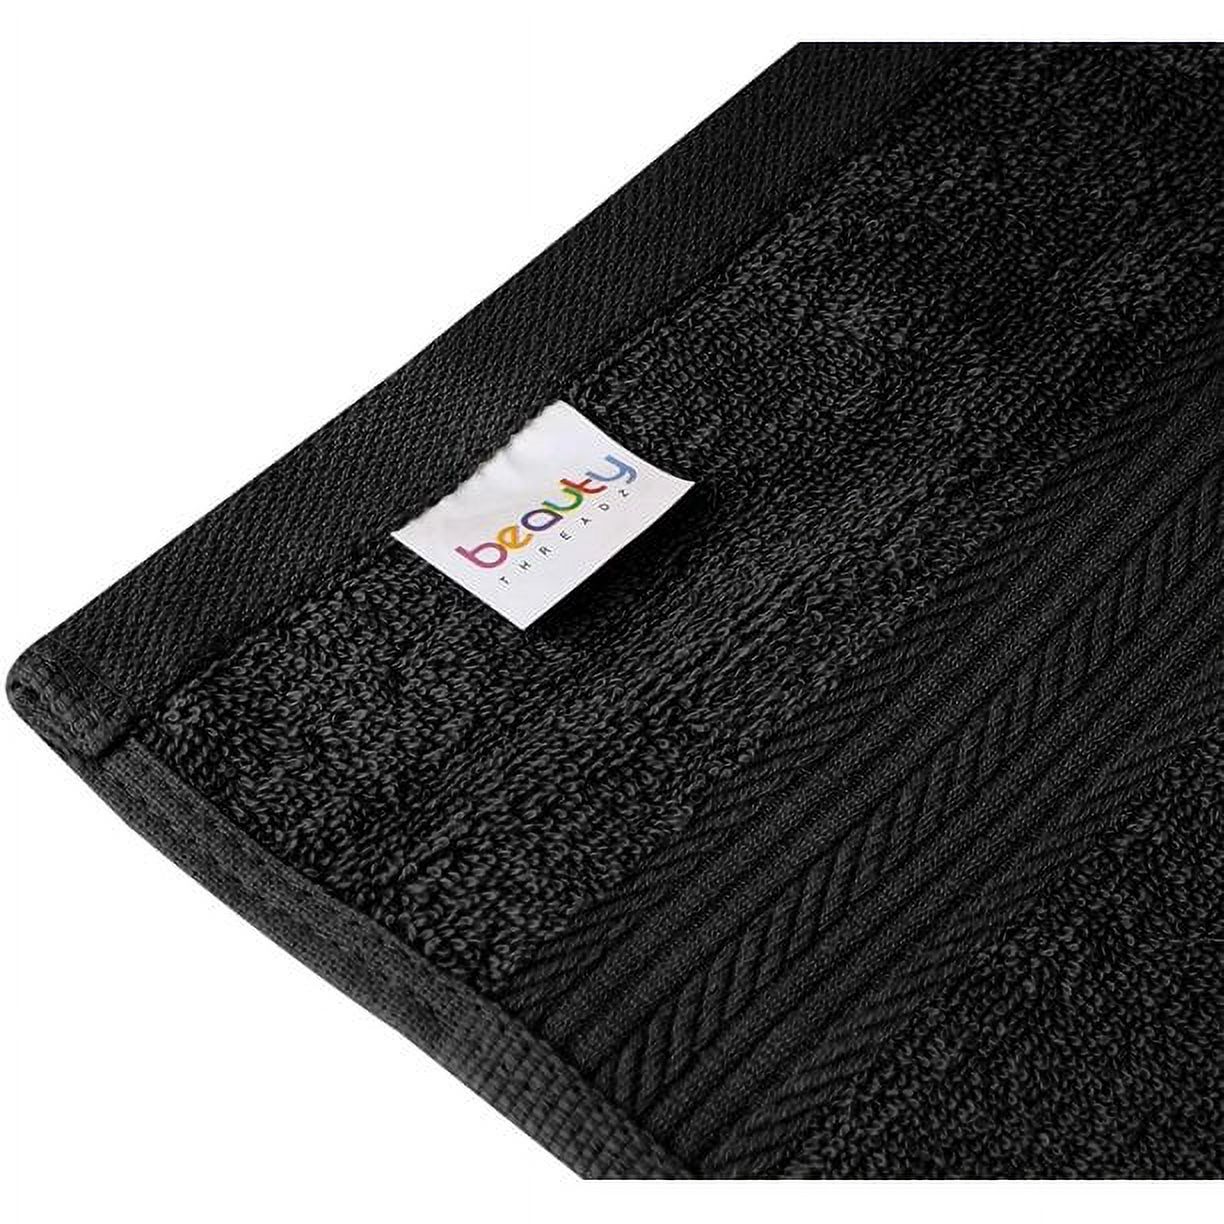 Beauty Threadz Ultra Soft 8 Piece Towel Set 500 GSM - 100% Pure Cotton, 2 Oversized Bath Towels 27x54, 2 Hand Towels 16x28, 4 Wash Cloths 13x13 - Ideal for Everyday use, Hotel & Spa- Black - image 3 of 7